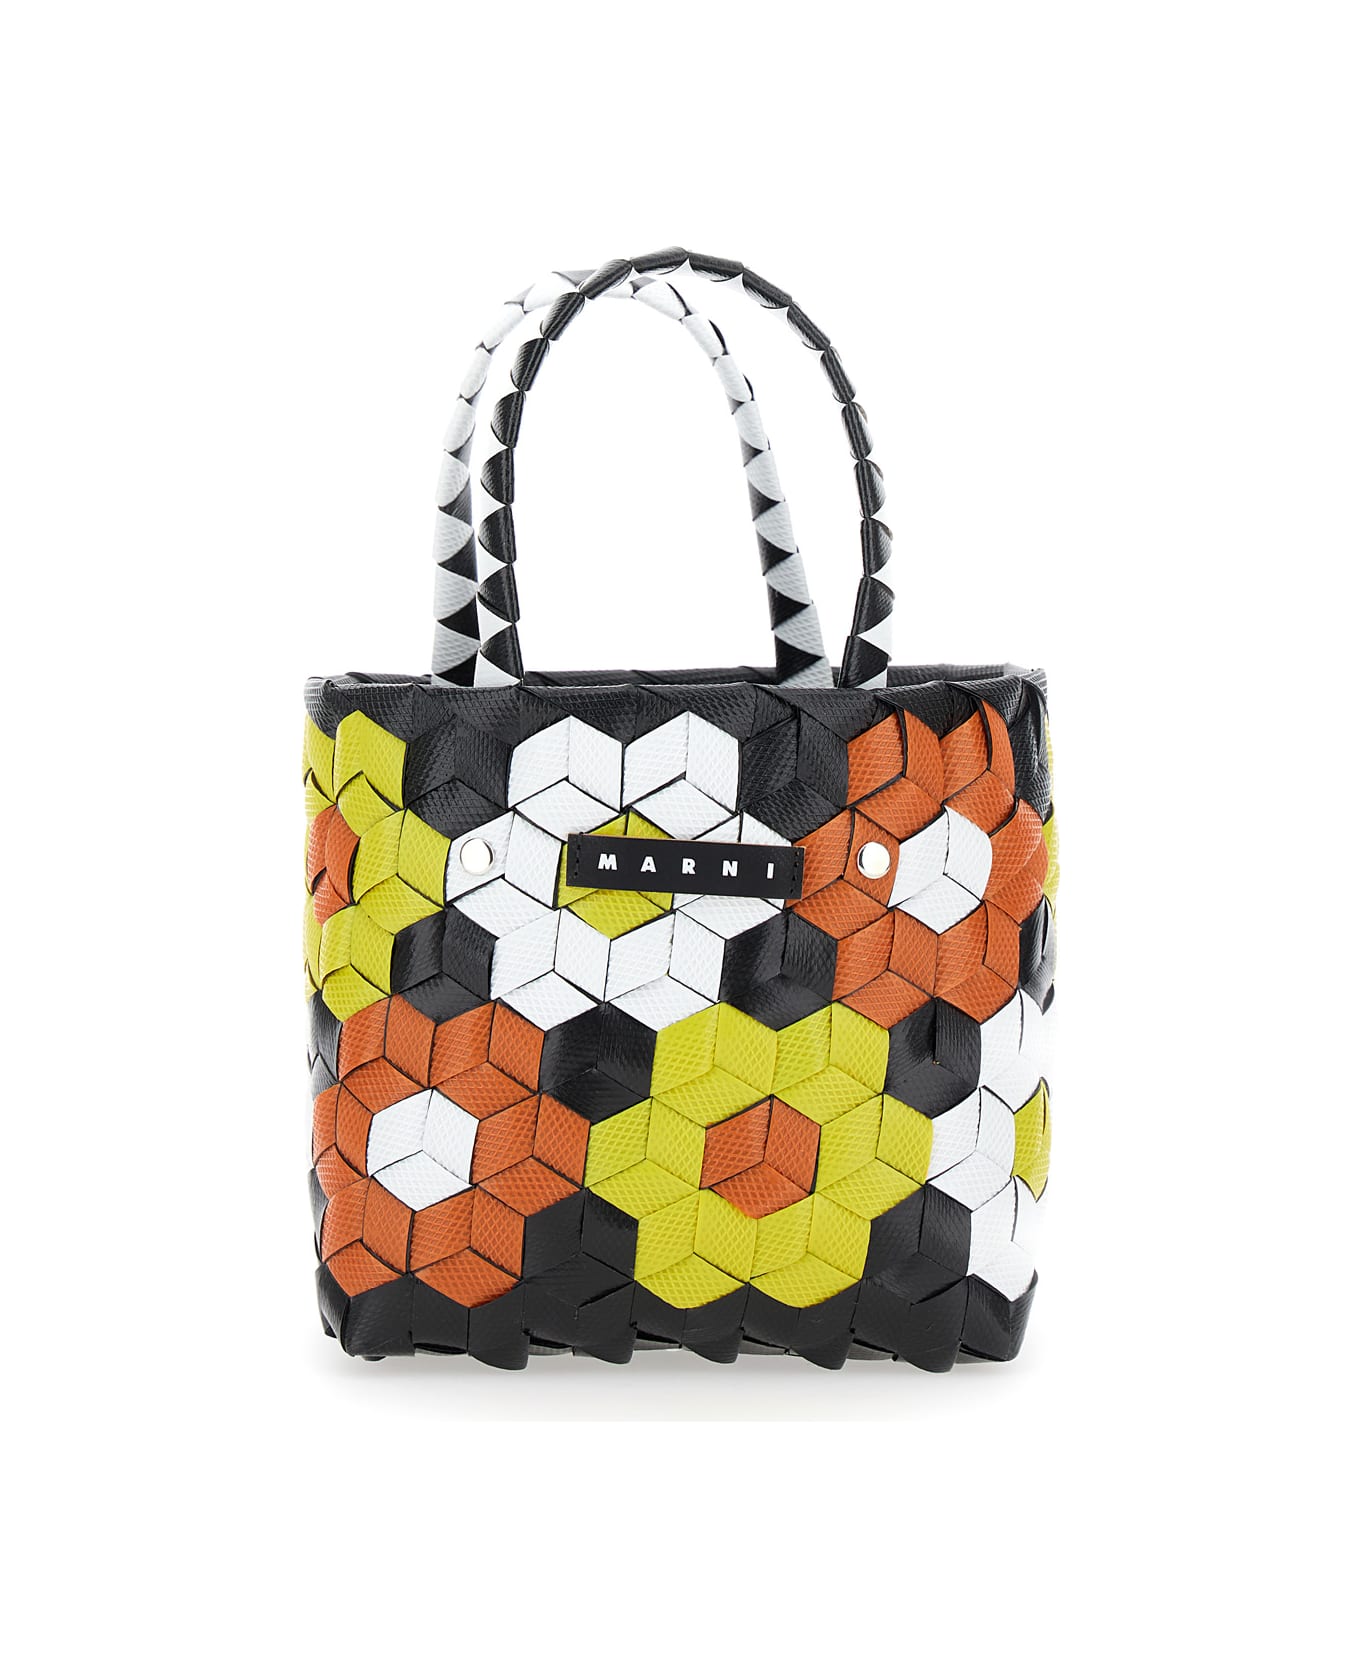 Marni 'sunflower' Multicolor Handbag With Floreal Motif In Braided Fabric Girl - Black アクセサリー＆ギフト